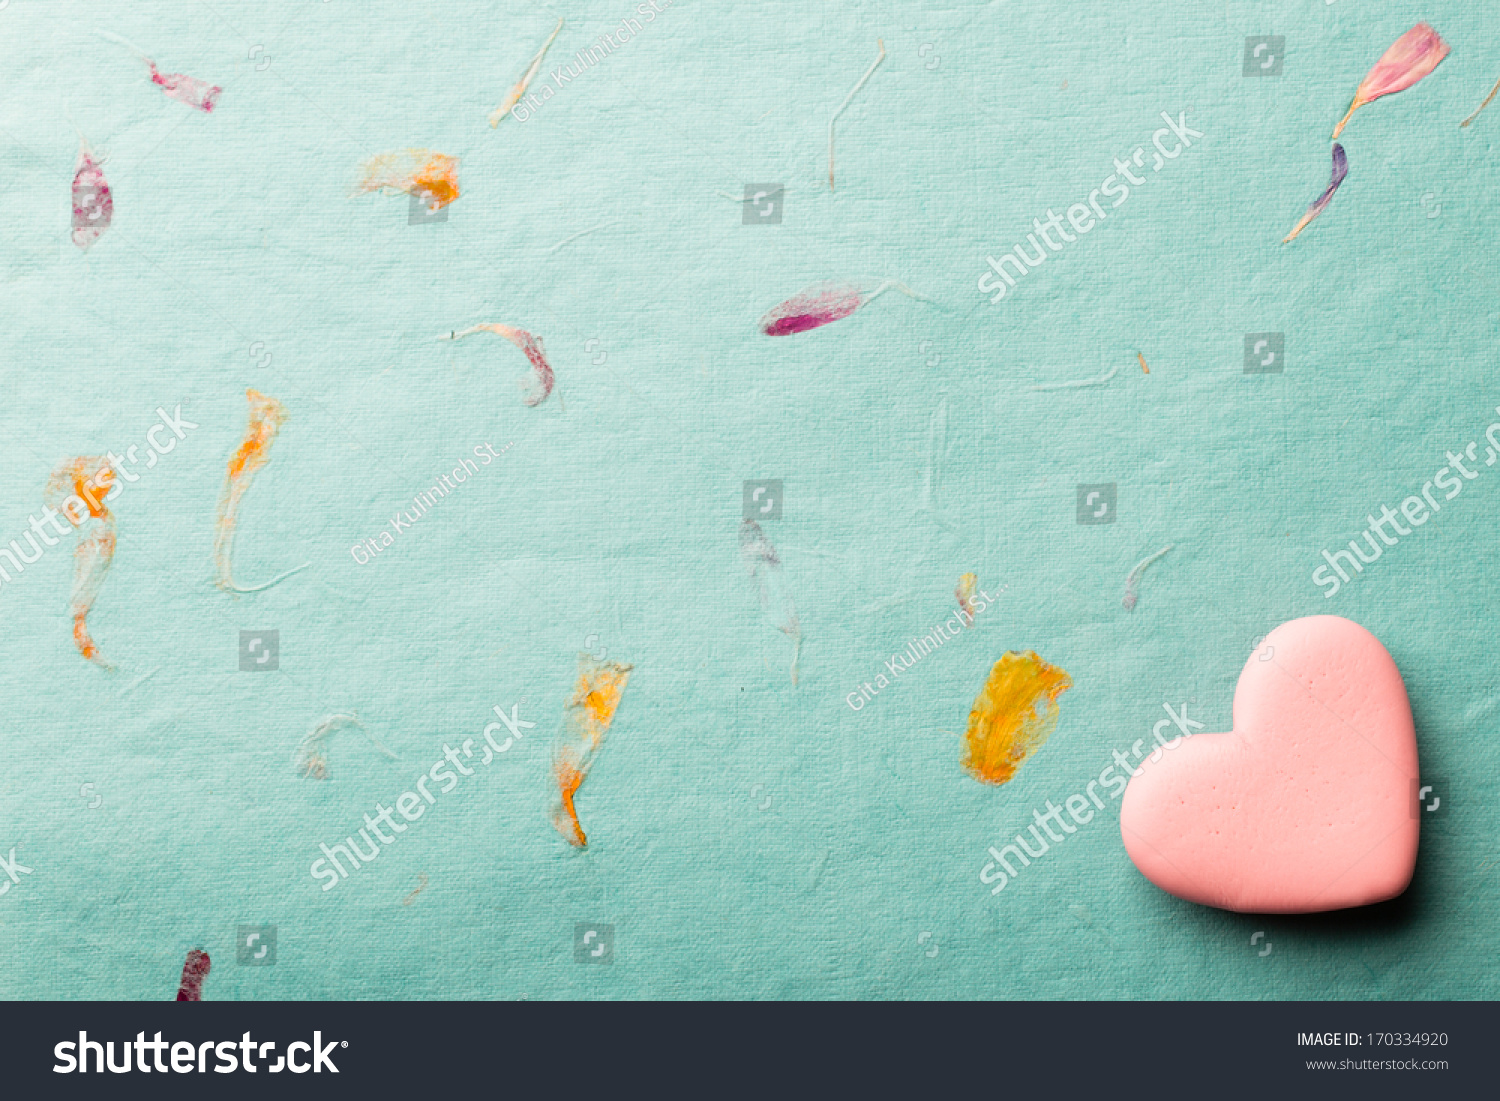 Pink heart-shaped candy on a paper background. #170334920